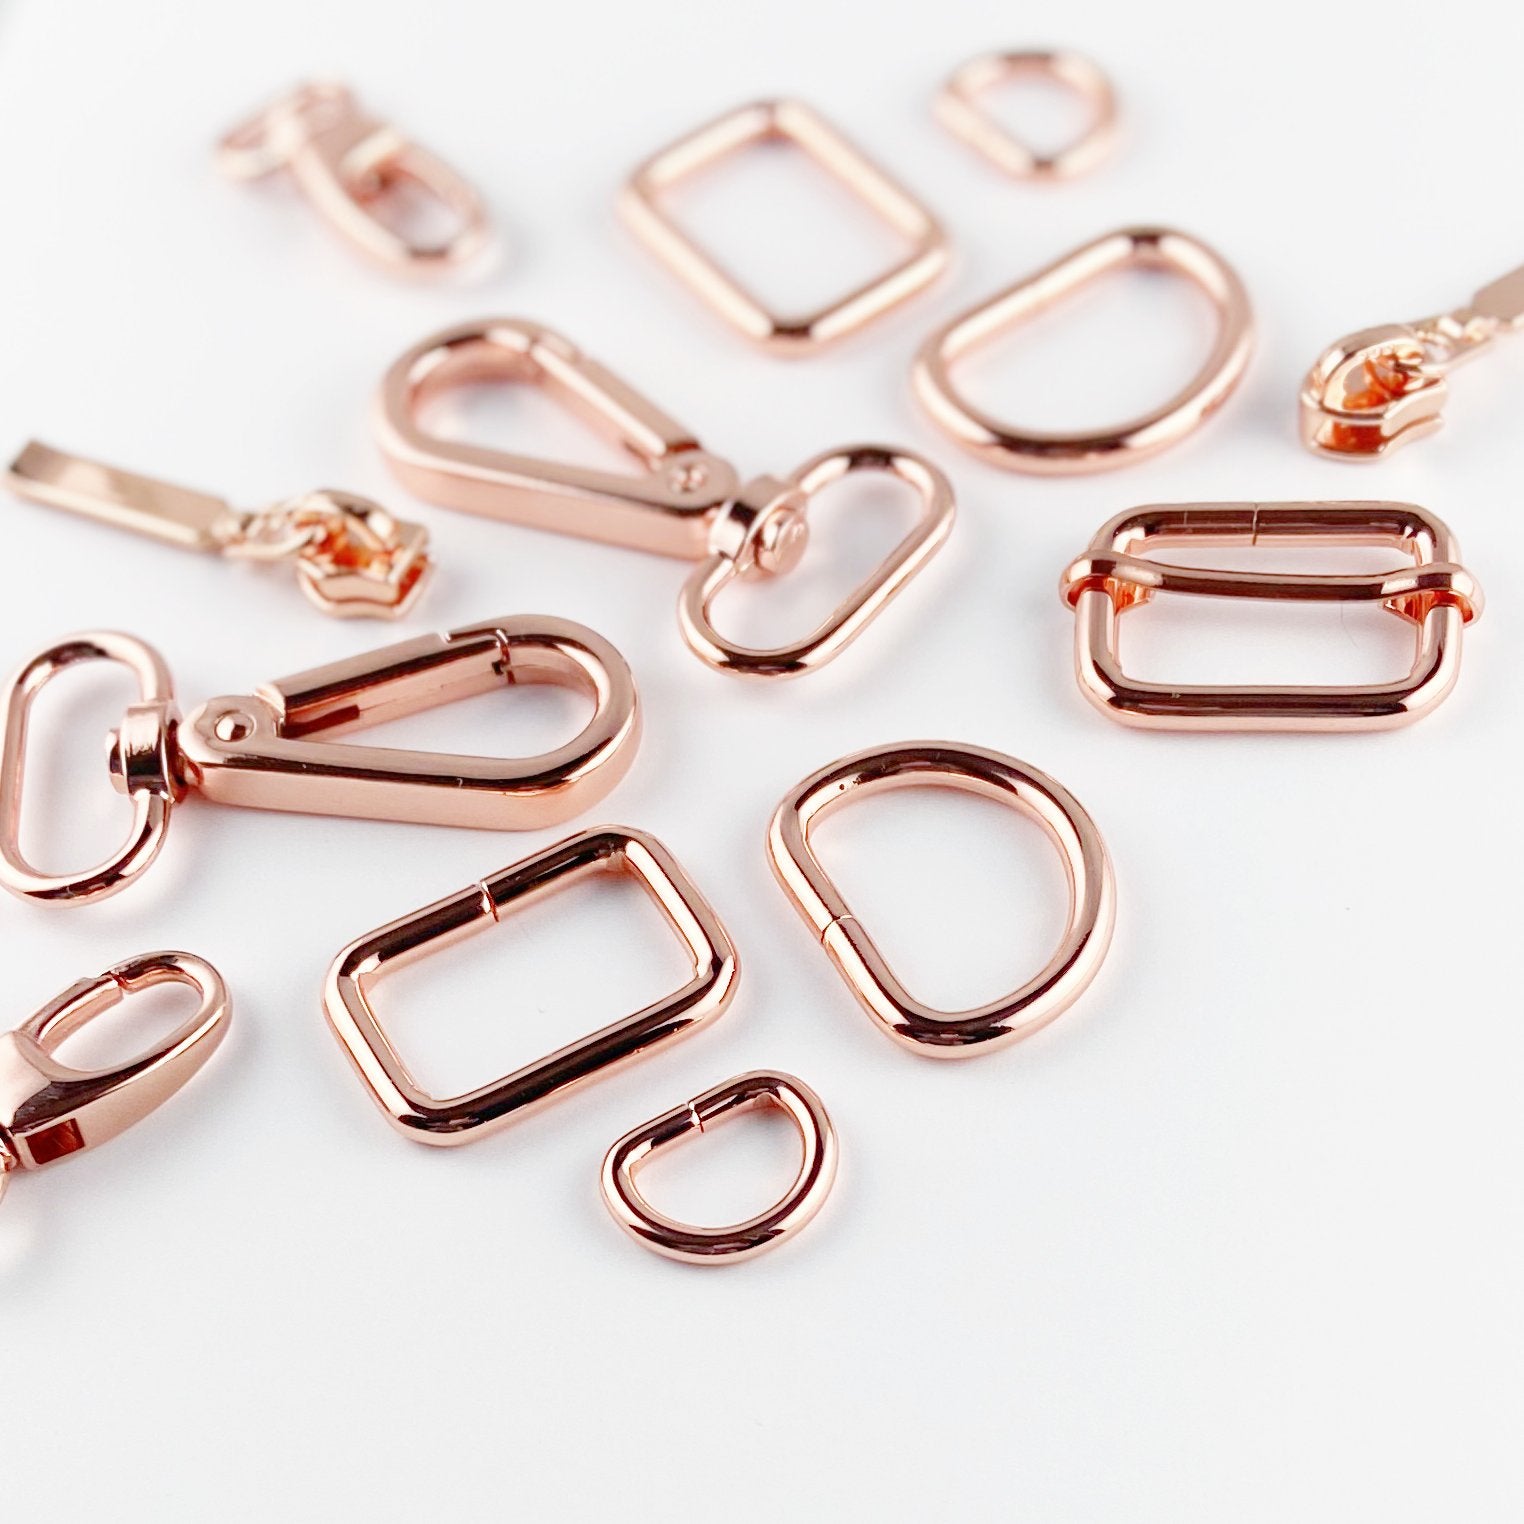 Set of D Rings and Swivel Hooks in Black, Rose Gold, Gold, Silver